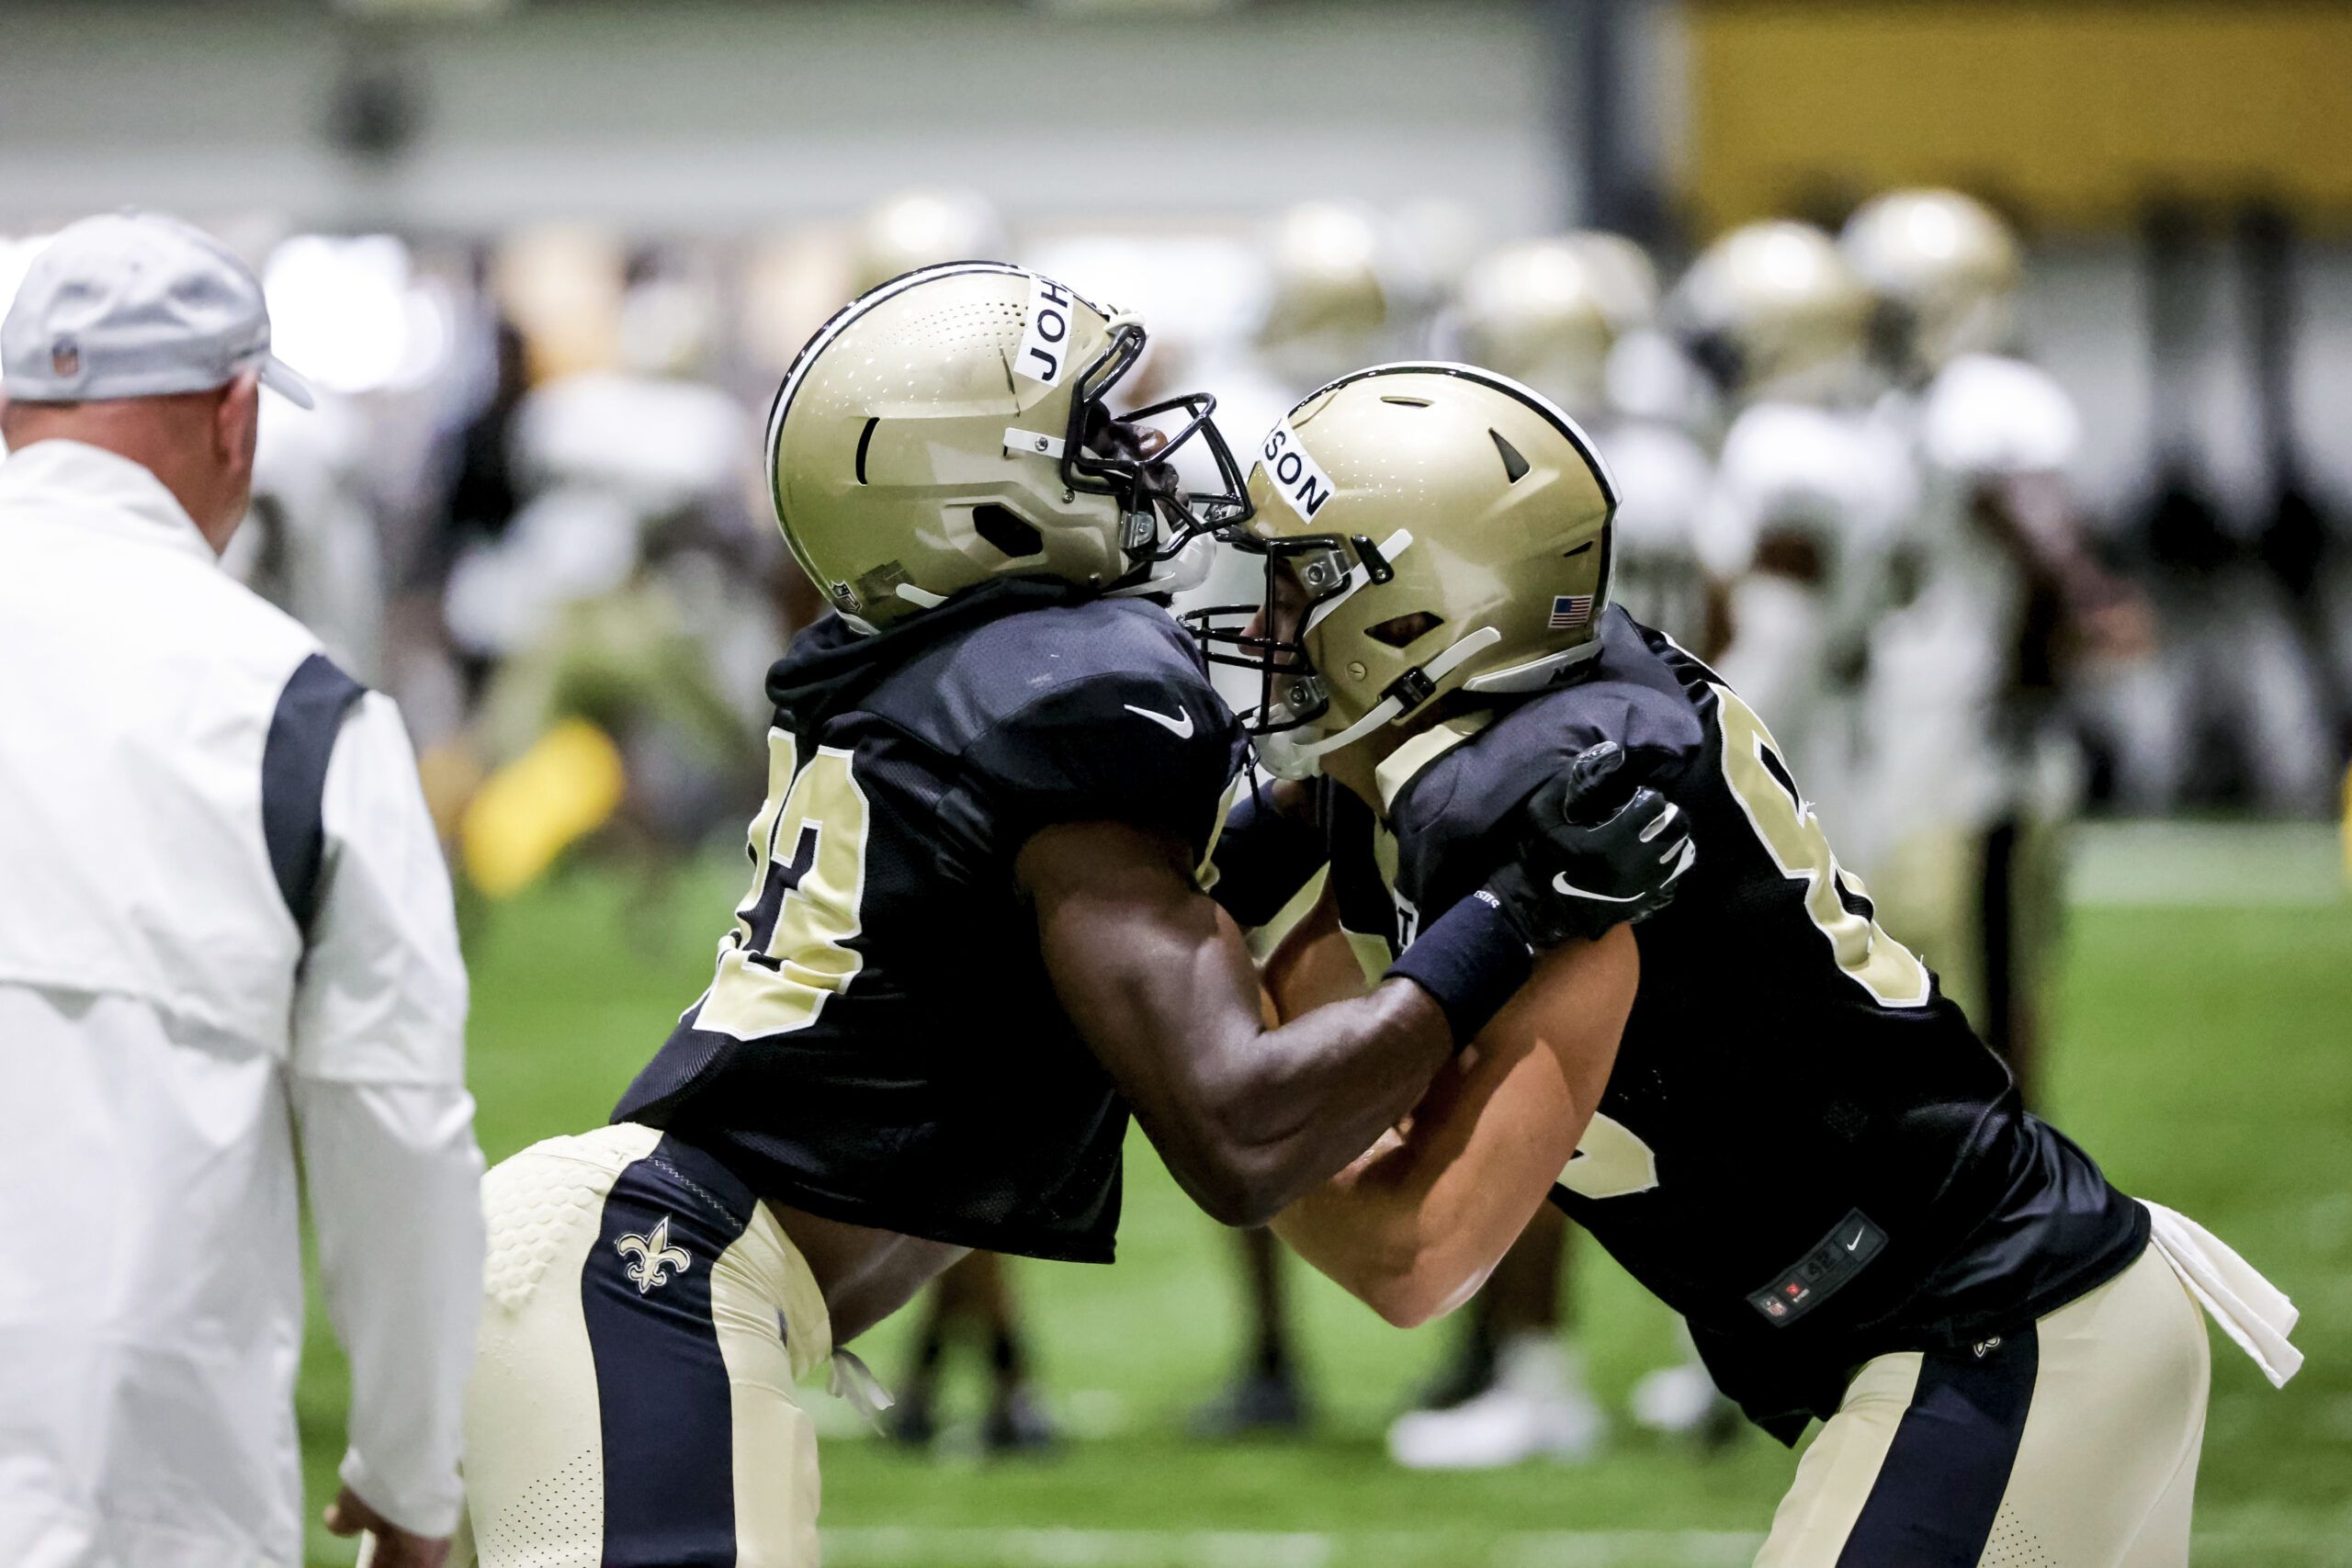 Updating the New Orleans Saints depth chart at TE…